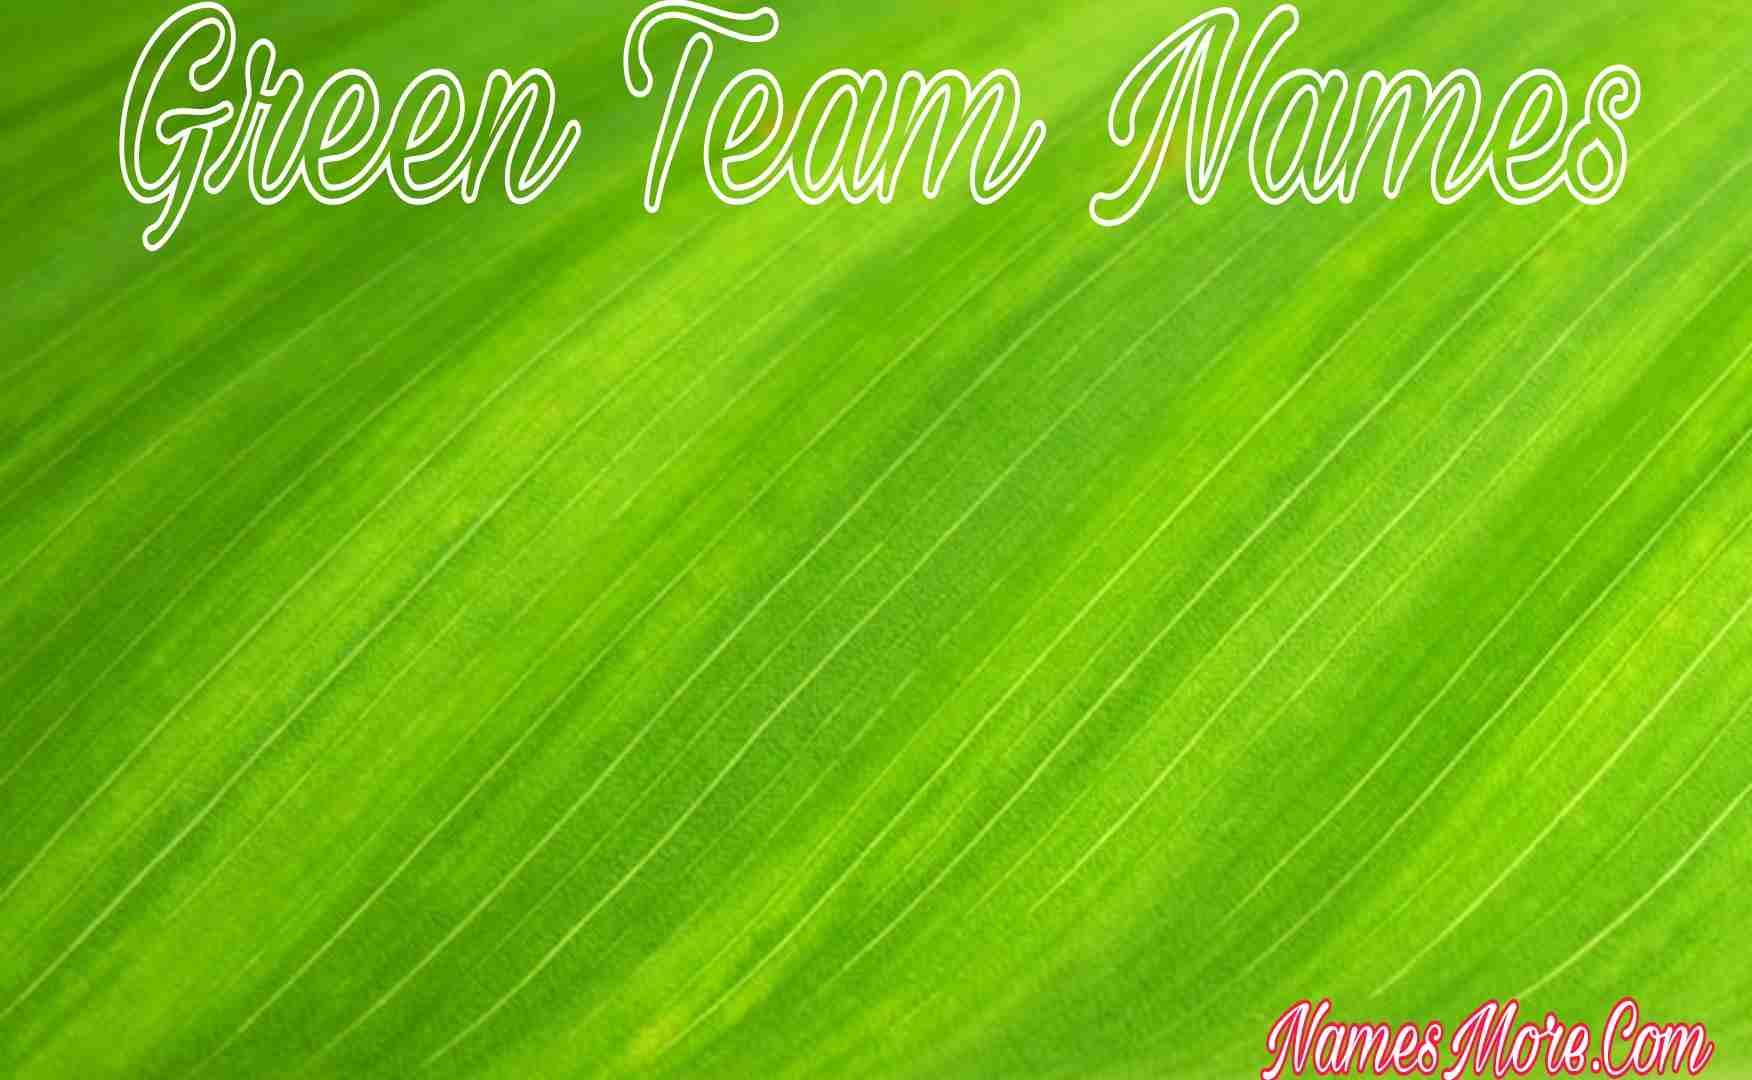 Featured Image for 700+ Green Team Names [Best Guide]